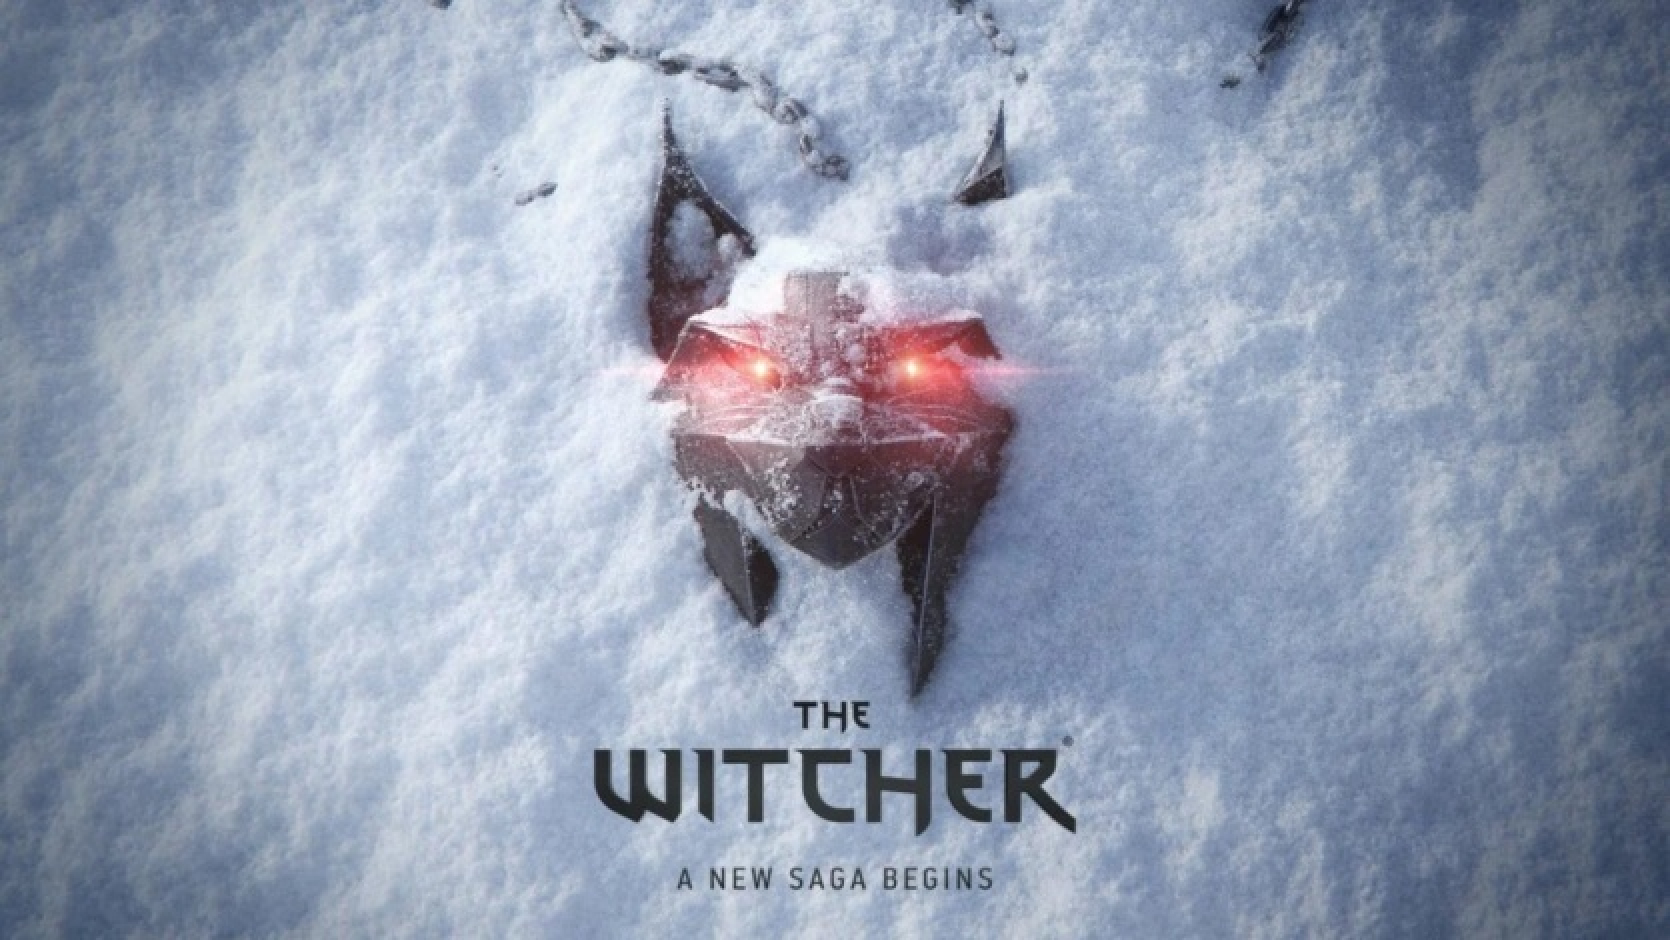 "The Witcher 4" is already in pre-production - the game is being handled by more than 60% (400 people) of the CD Projekt team